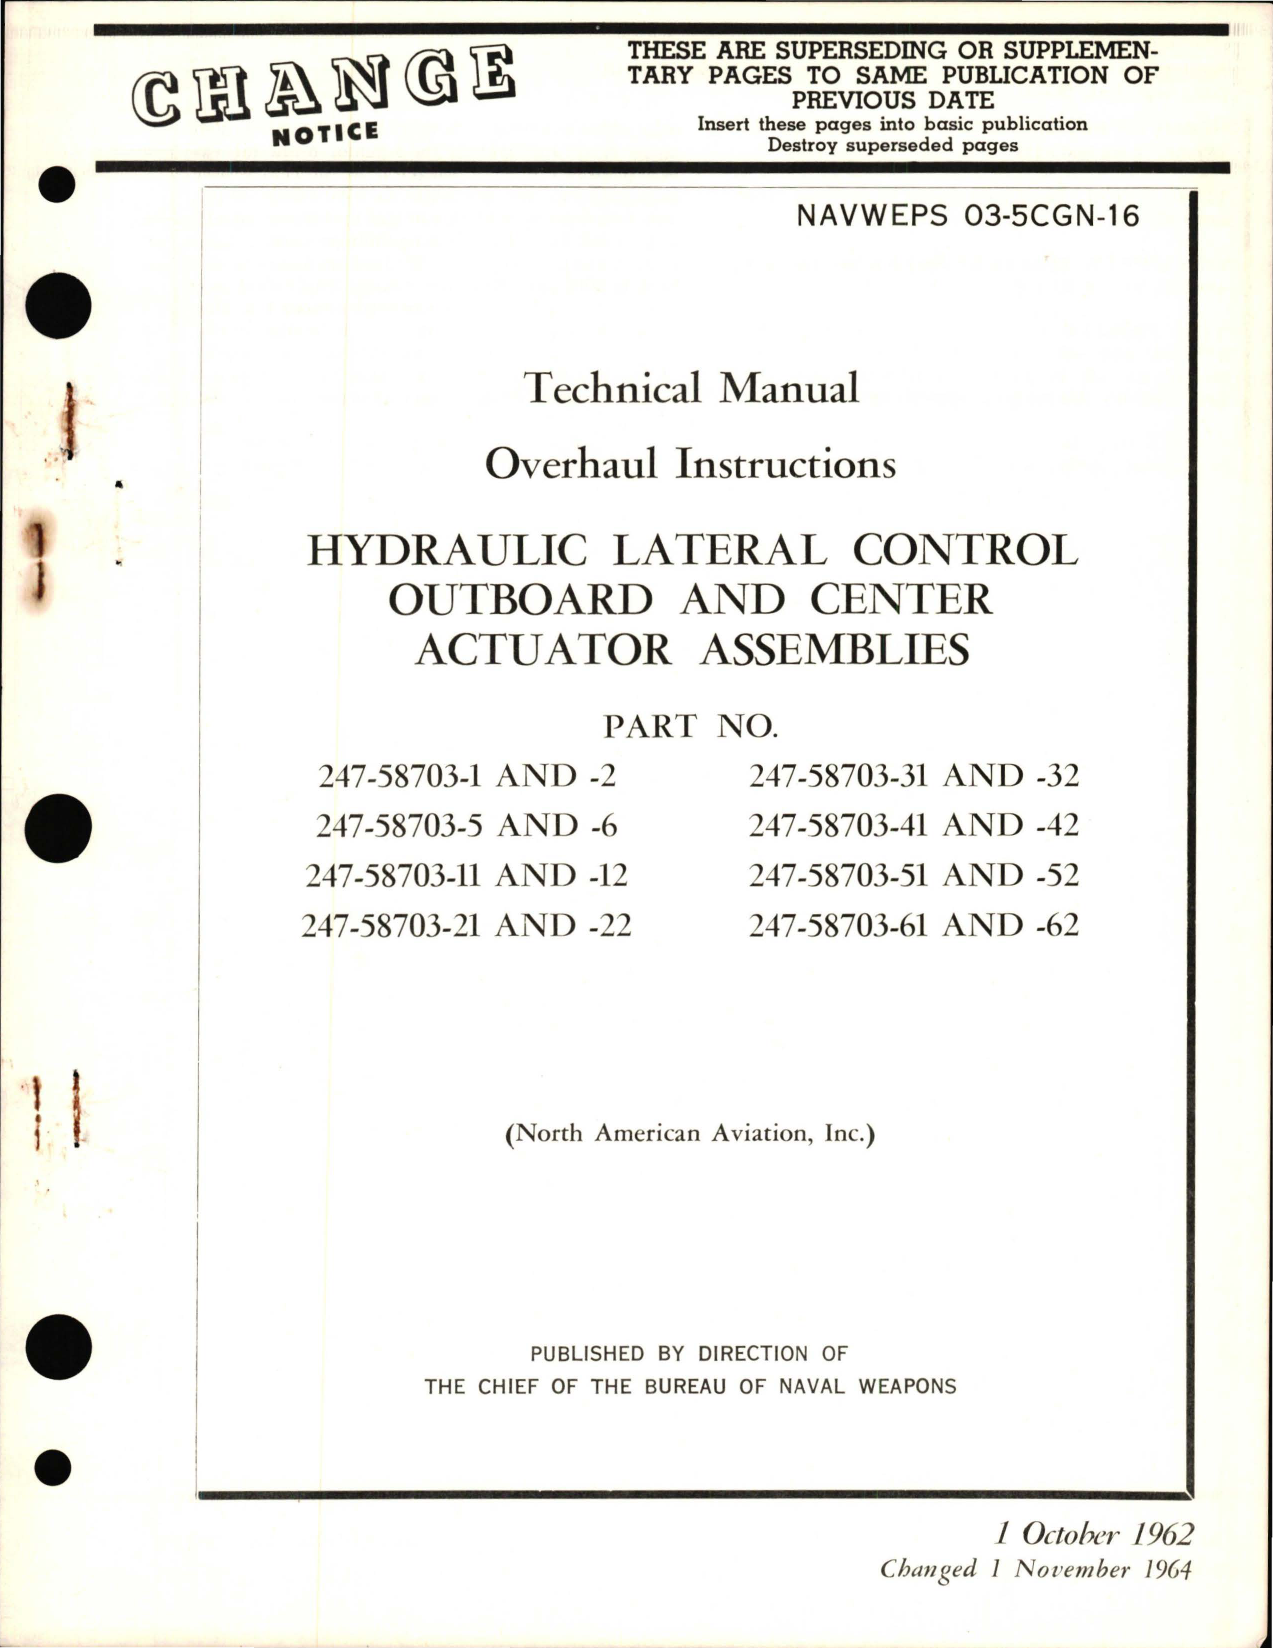 Sample page 1 from AirCorps Library document: Overhaul Instructions for Hydraulic Lateral Control Outboard and Center Actuator Assemblies Part 247-58703 Series 